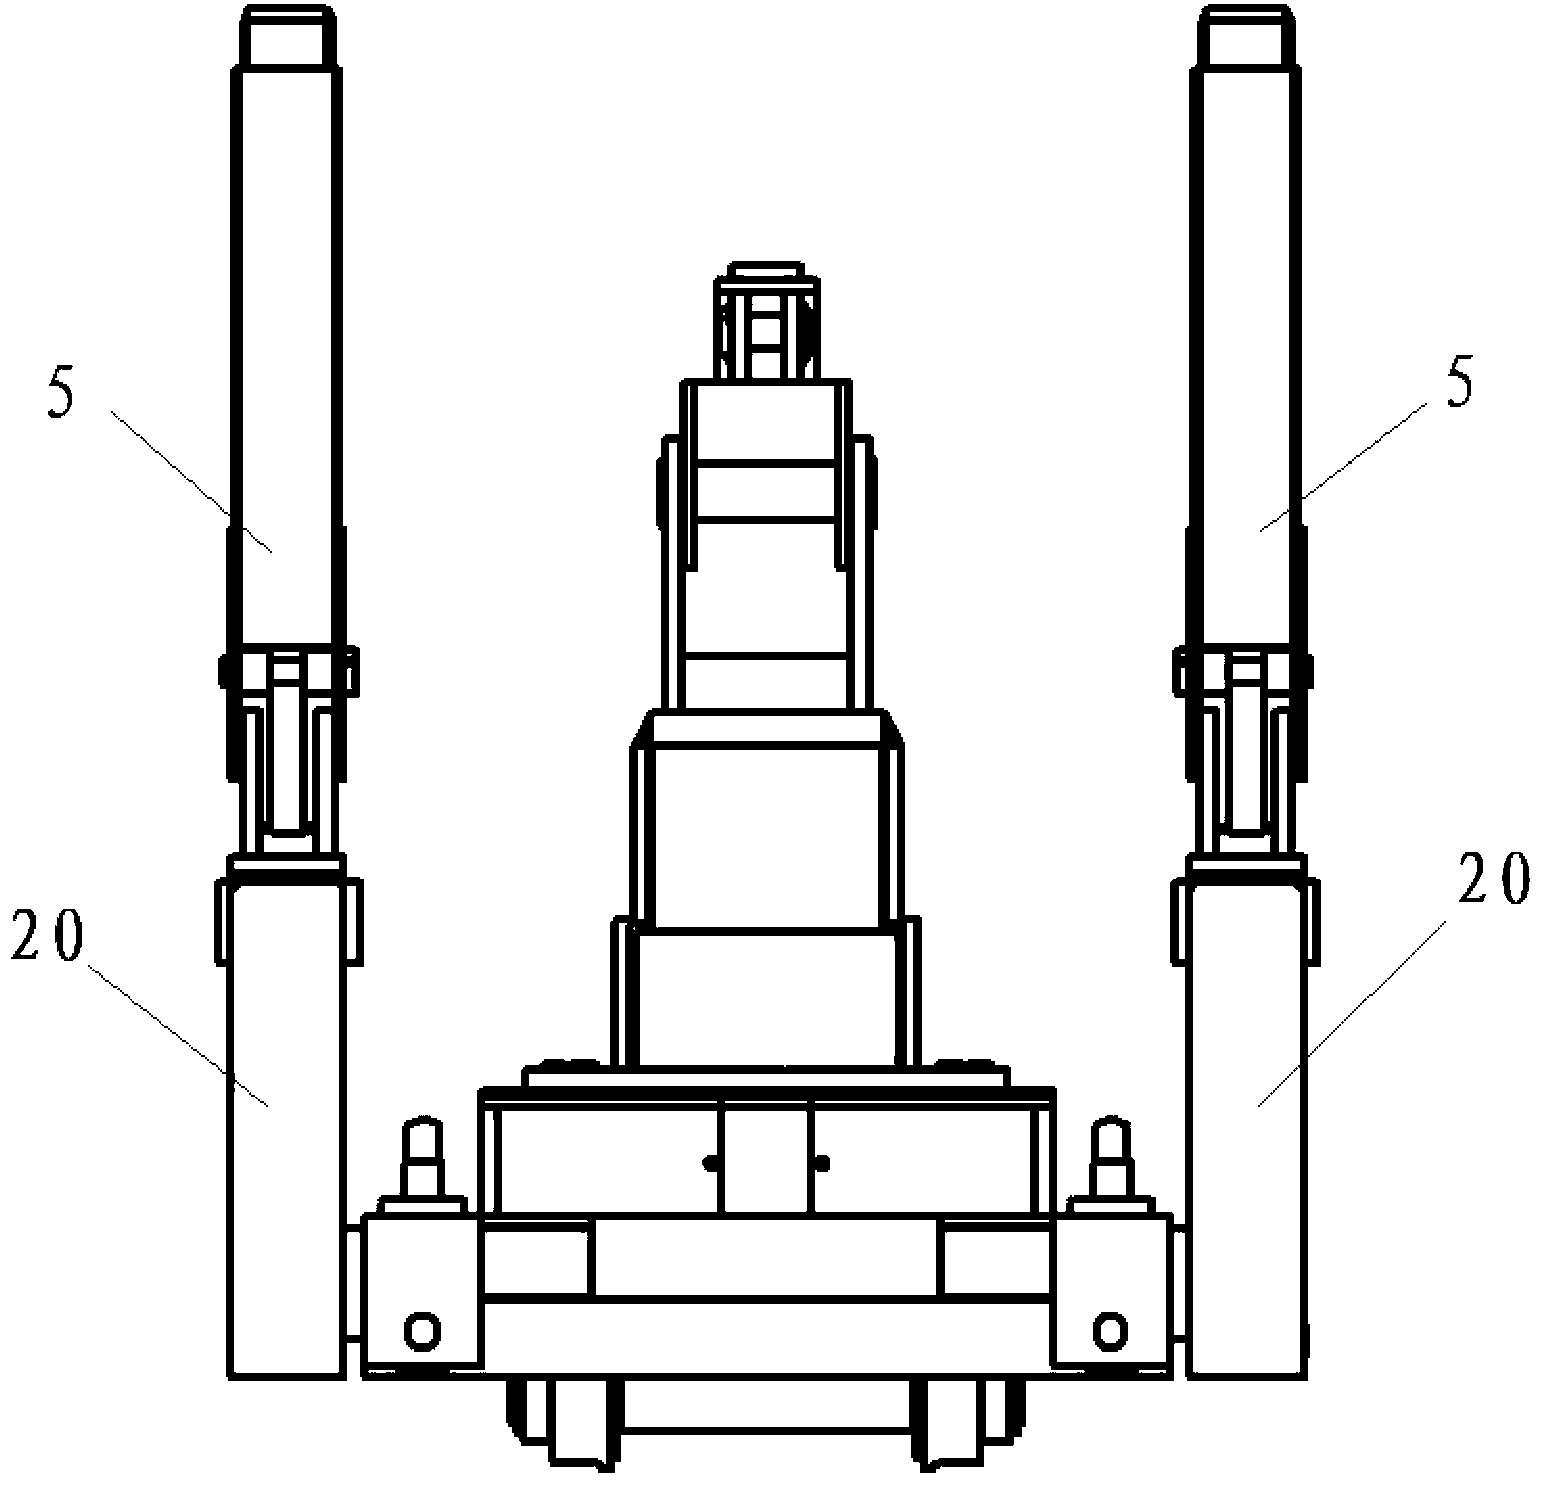 Roadway work surface hydraulic roof connecting device